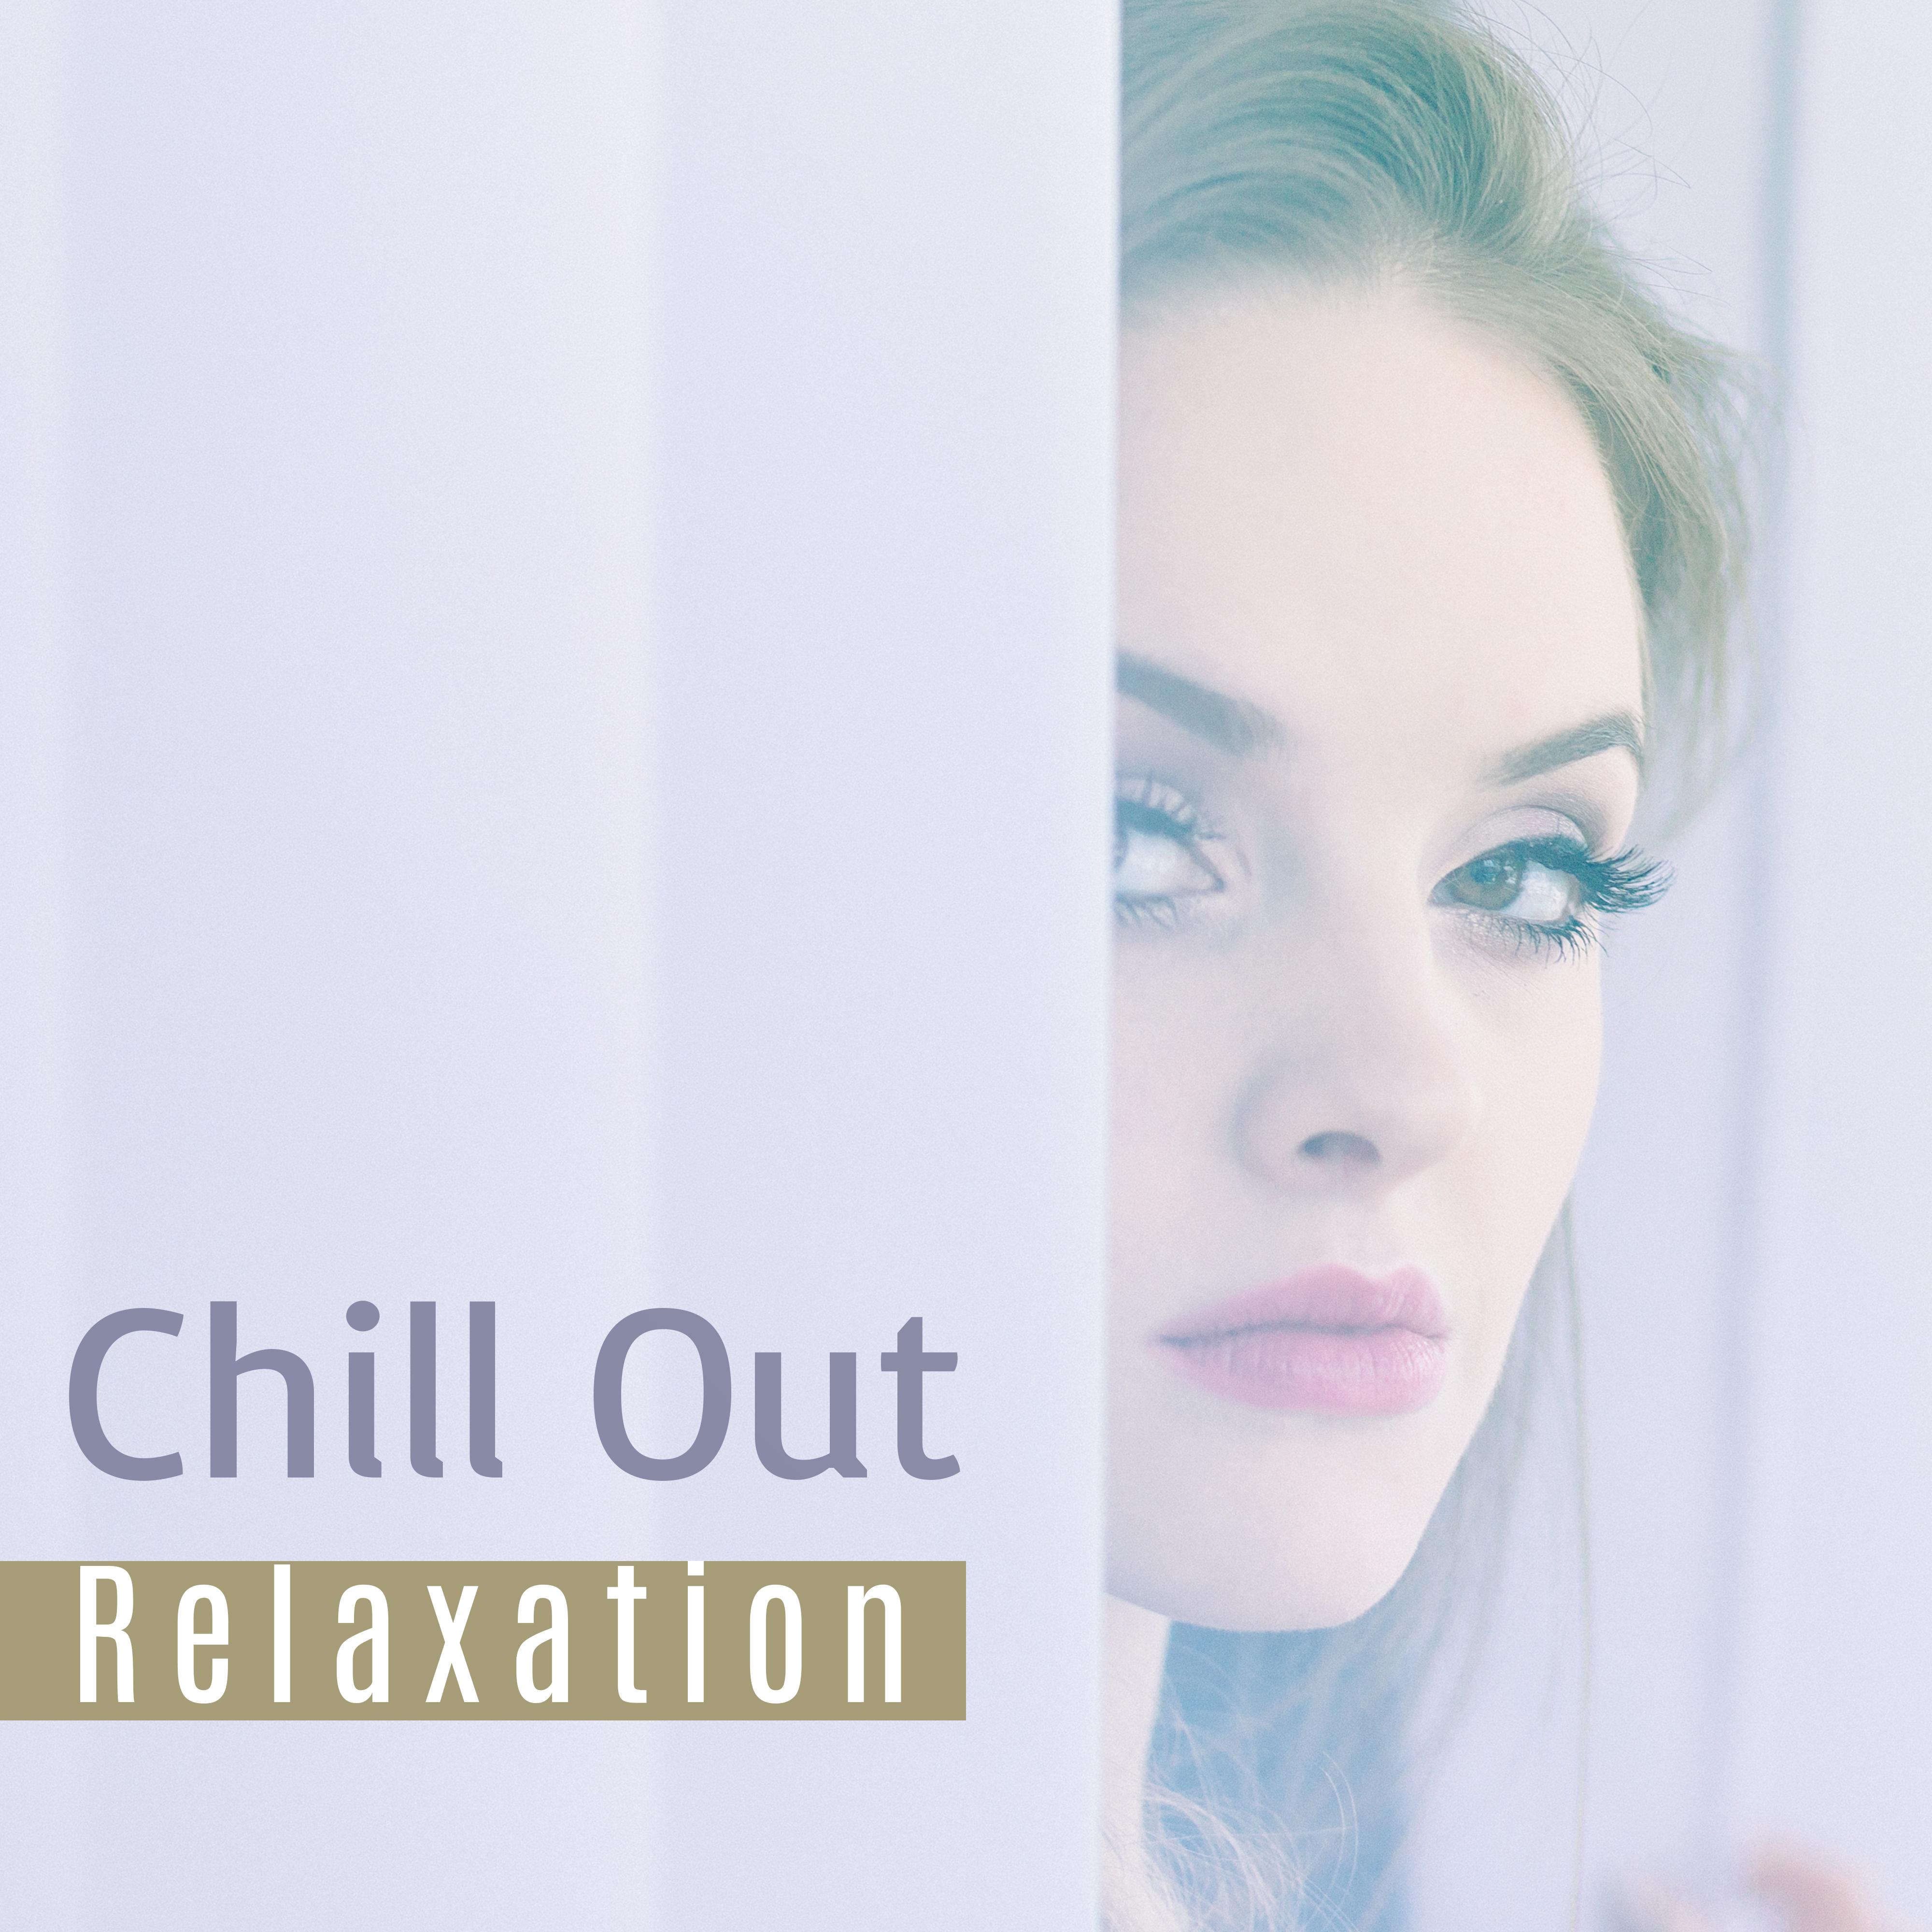 Chill Out Relaxation  Songs to Relax, Easy Listening, Chill Out House Lounge, Rest a Bit